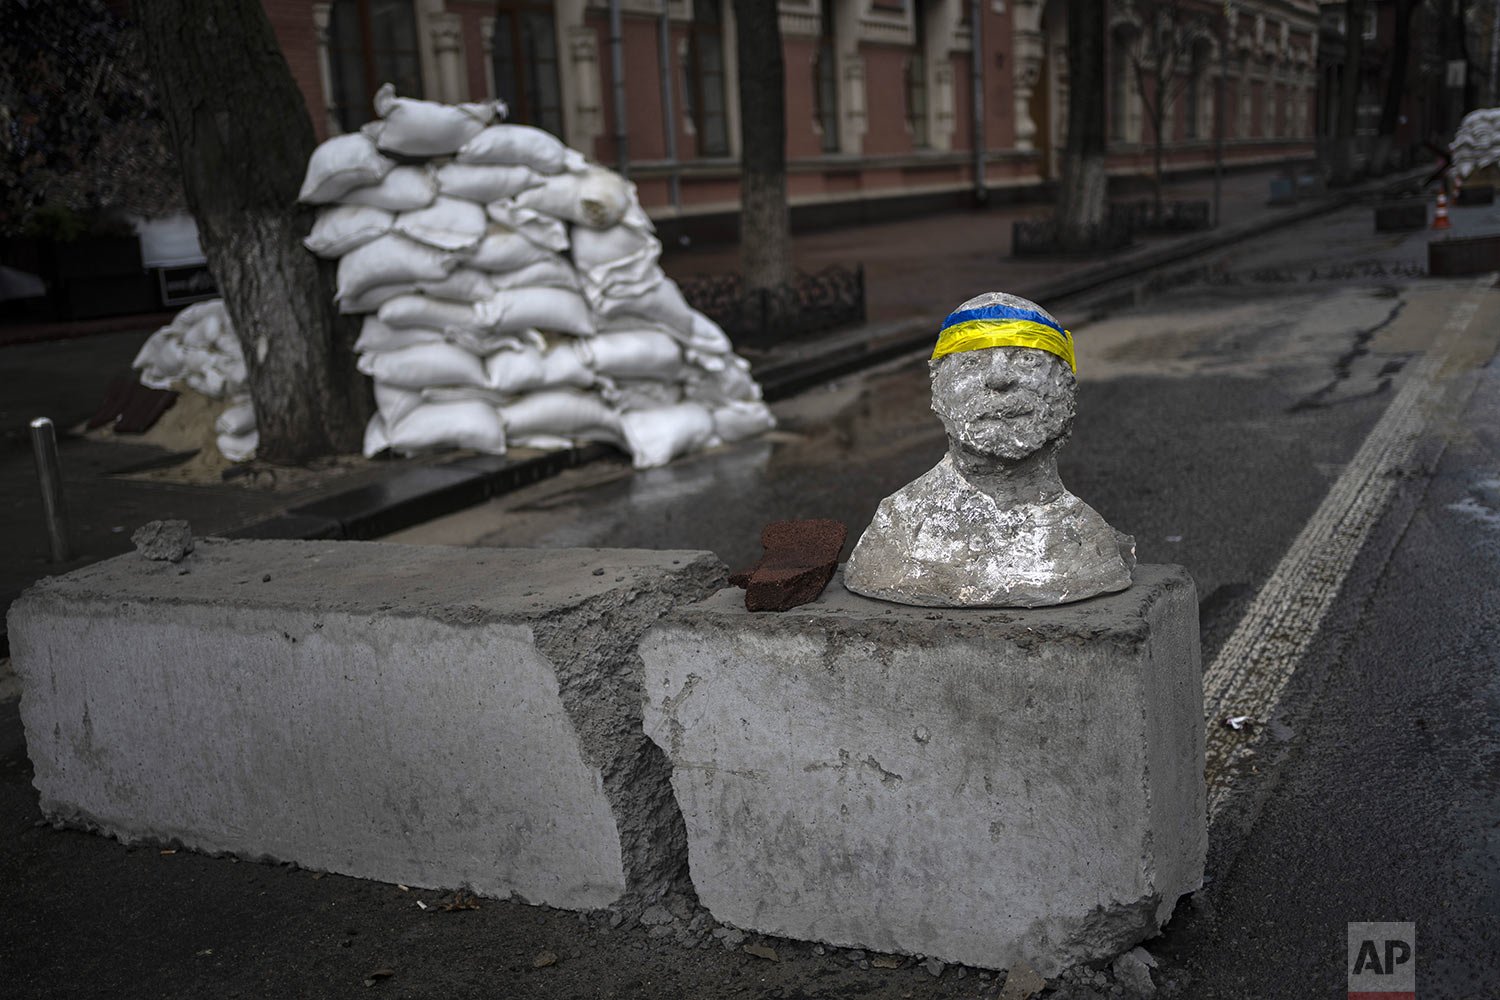  A sculpture adorned with a headband designed with the colors of the Ukraine national flag sits on top of a concrete block at a checkpoint in Kyiv, Ukraine, Saturday, March 26, 2022. With the invasion now in its second month, Russian forces have seem